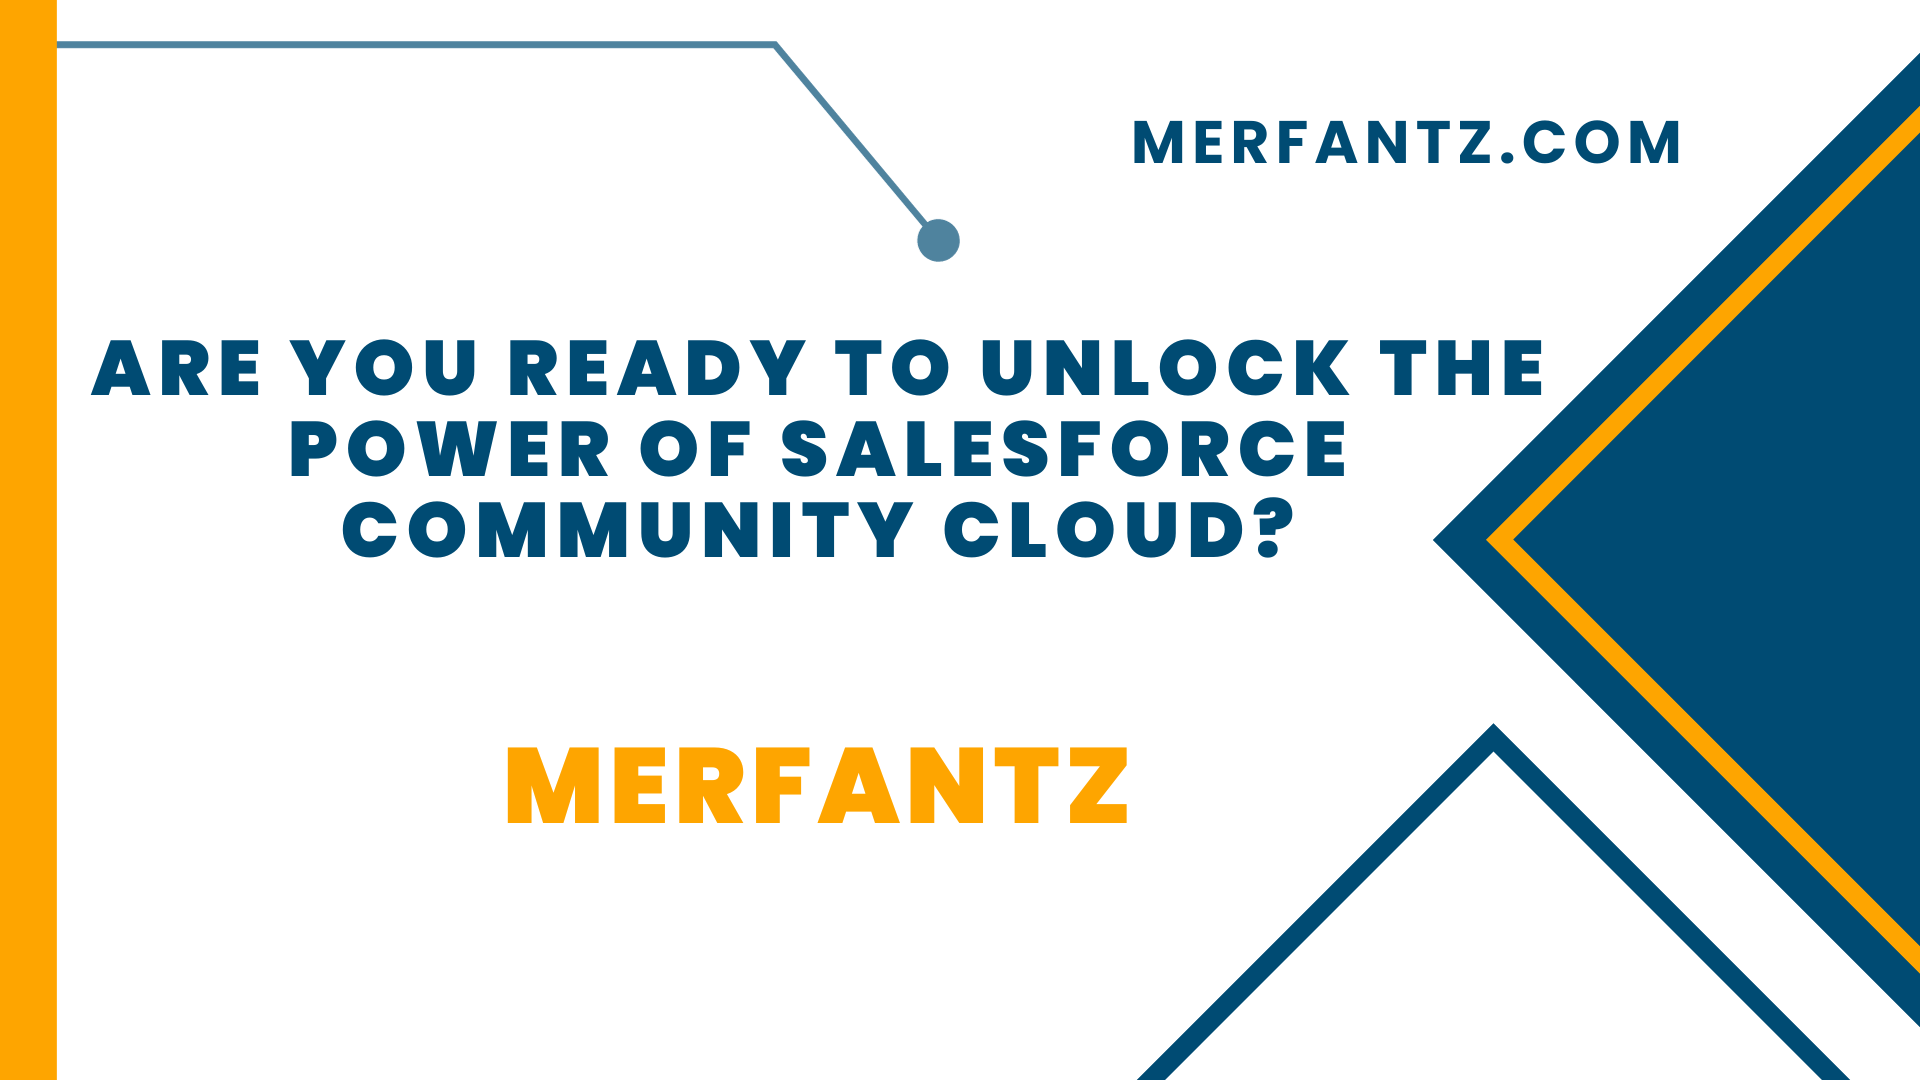 Are You Ready to Unlock the Power of Salesforce Community Cloud